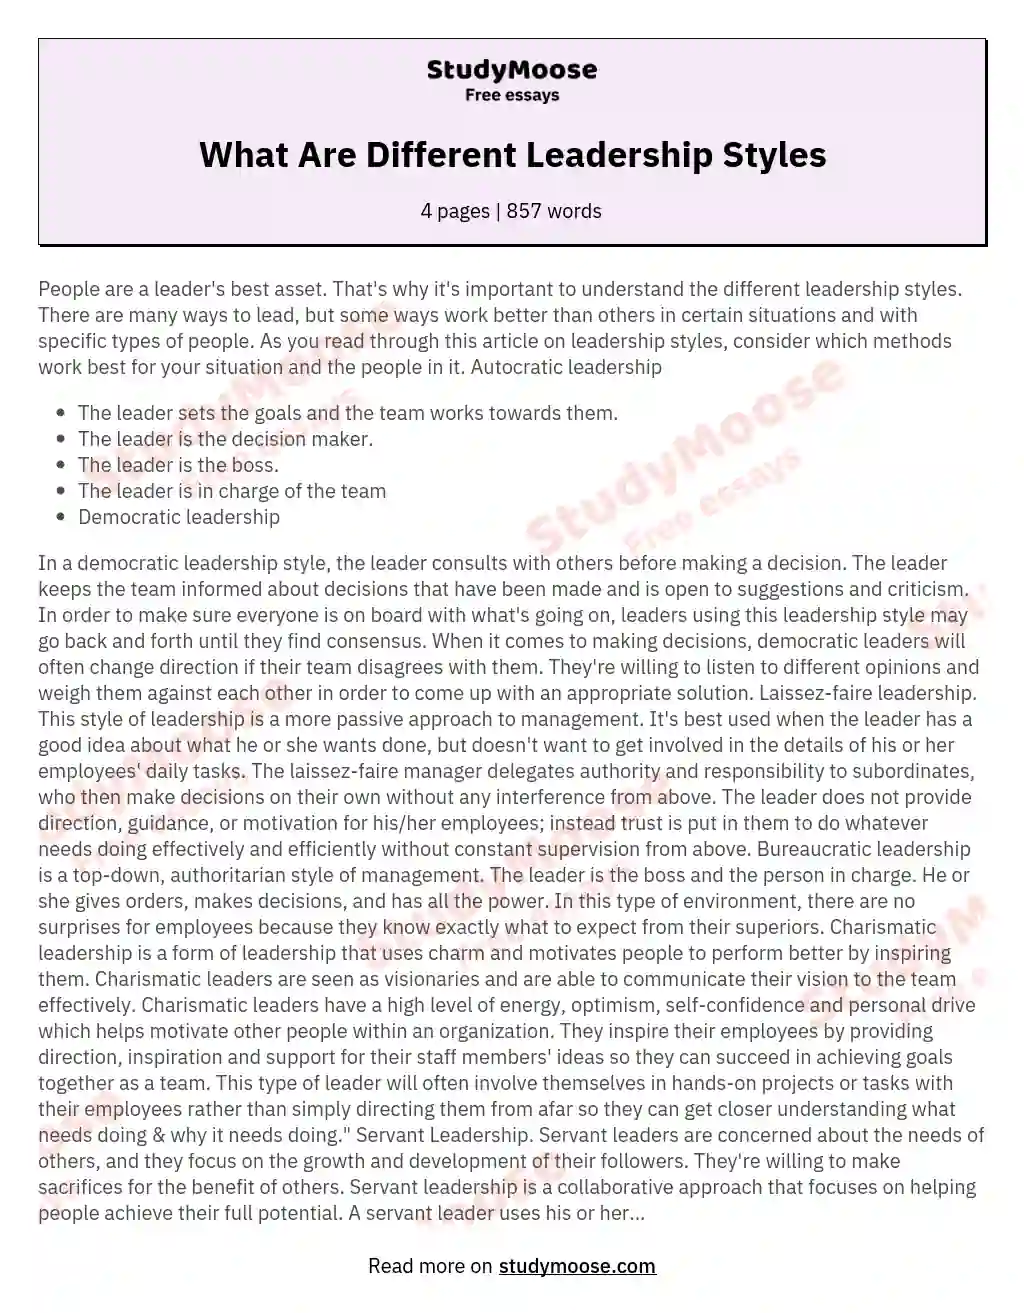 What Are Different Leadership Styles essay